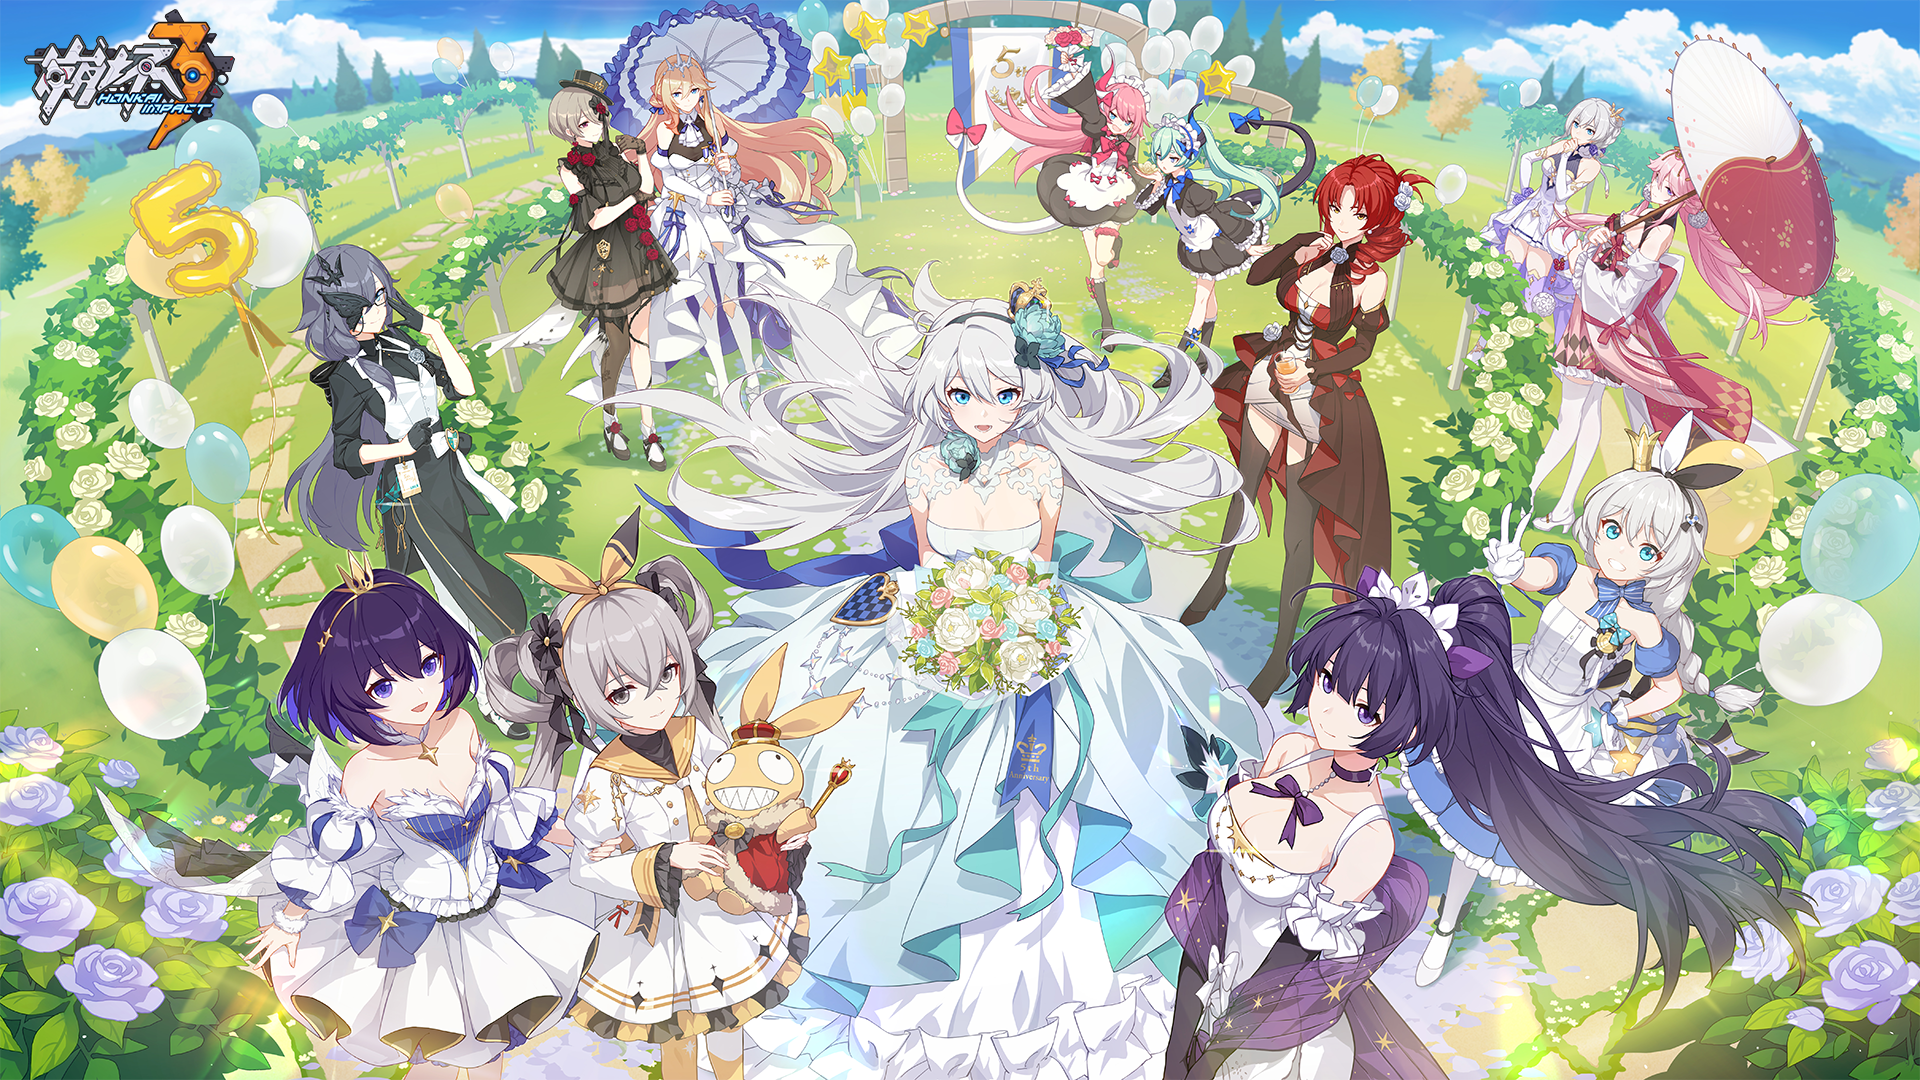 Anime 1920x1080 Honkai Impact anime games dress wedding dress flowers balloon grass looking at viewer peace sign umbrella choker gloves glasses smiling anniversary video games